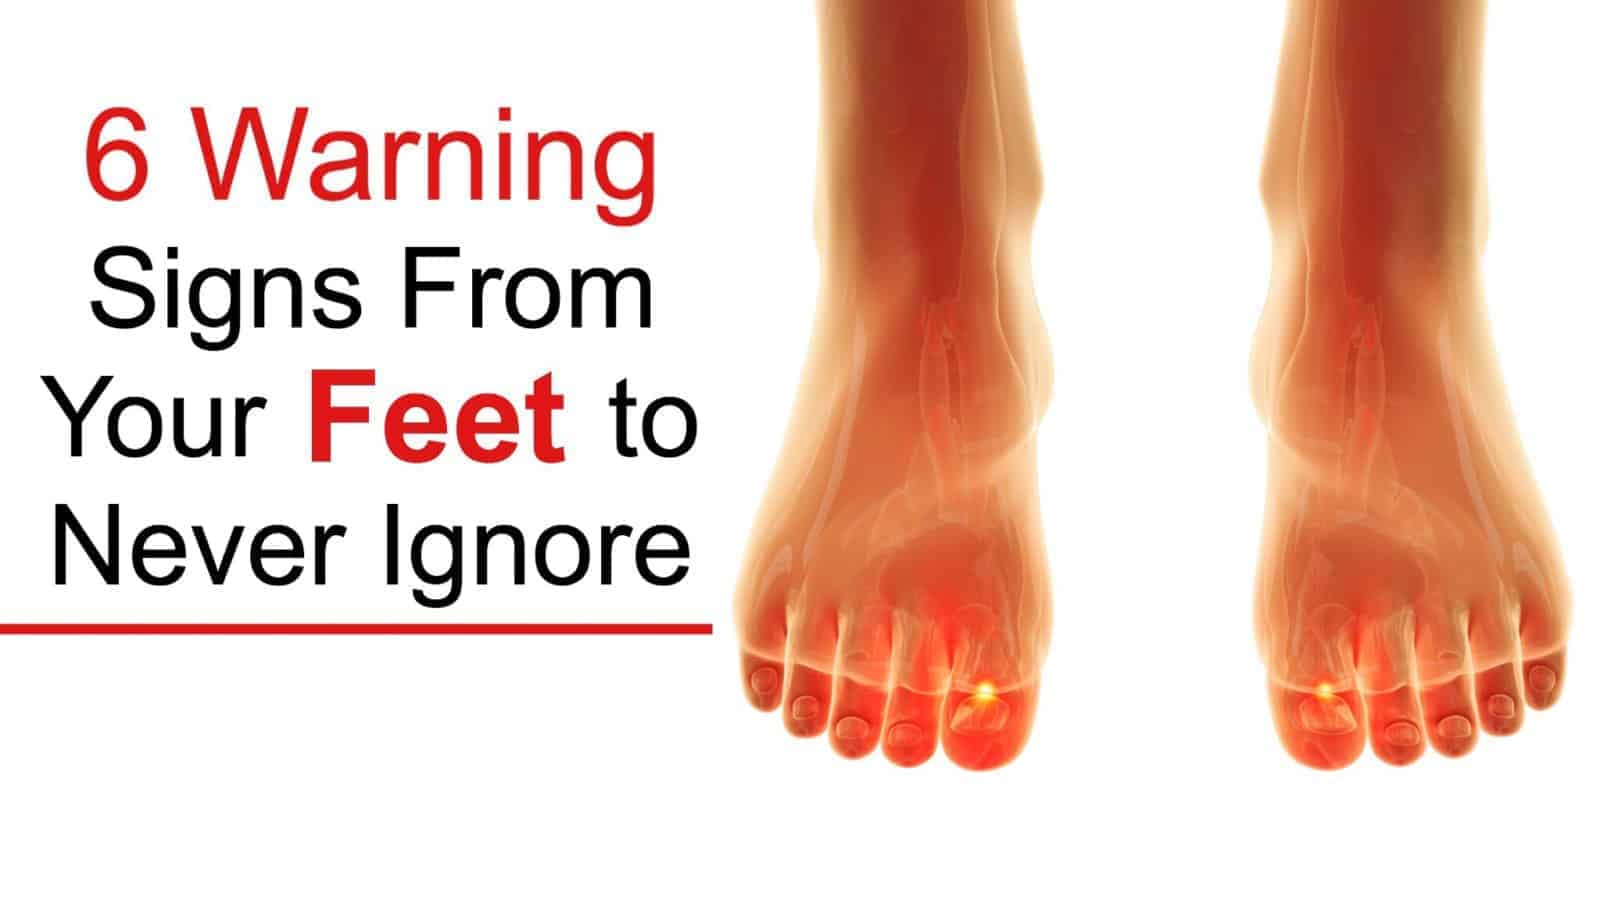 6 Health Warning Signs From Your Feet to Never Ignore